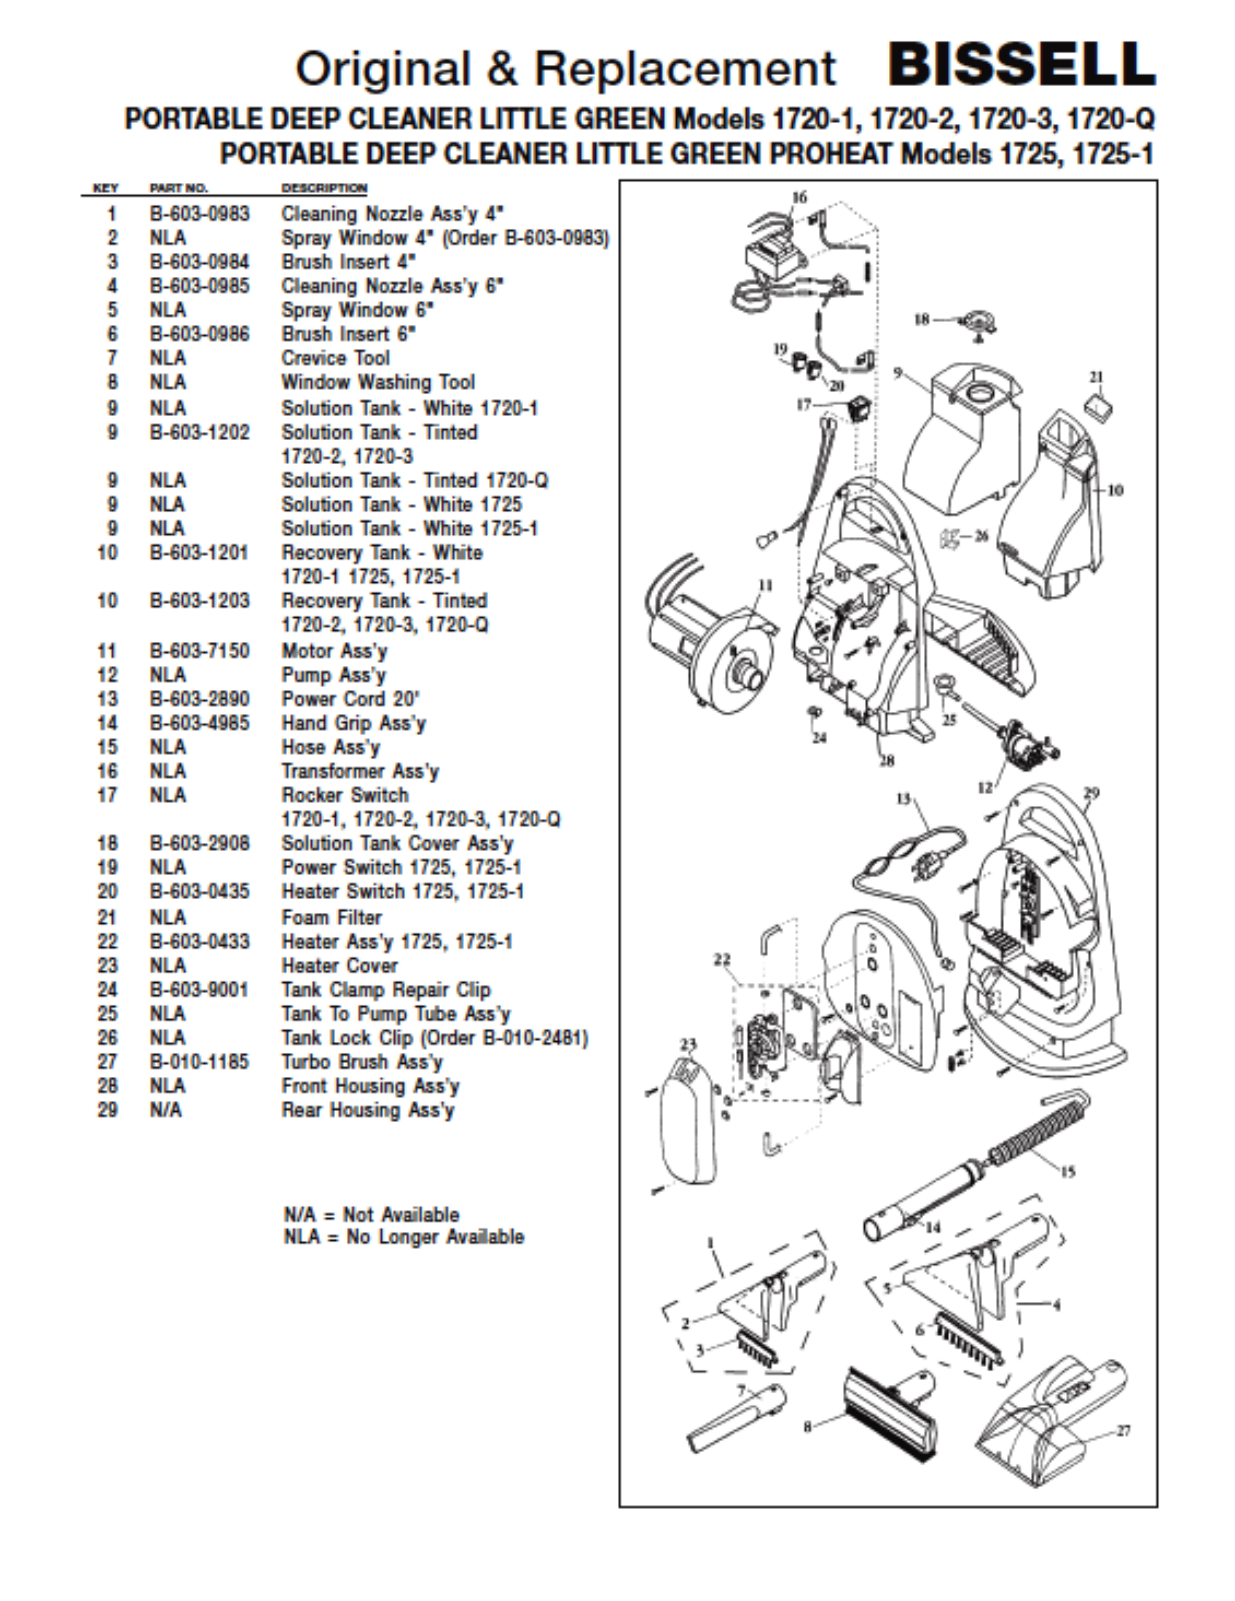 Bissell 1720-1, 1720-2, 1720-3, 1720-q, 1720-6 Owner's Manual